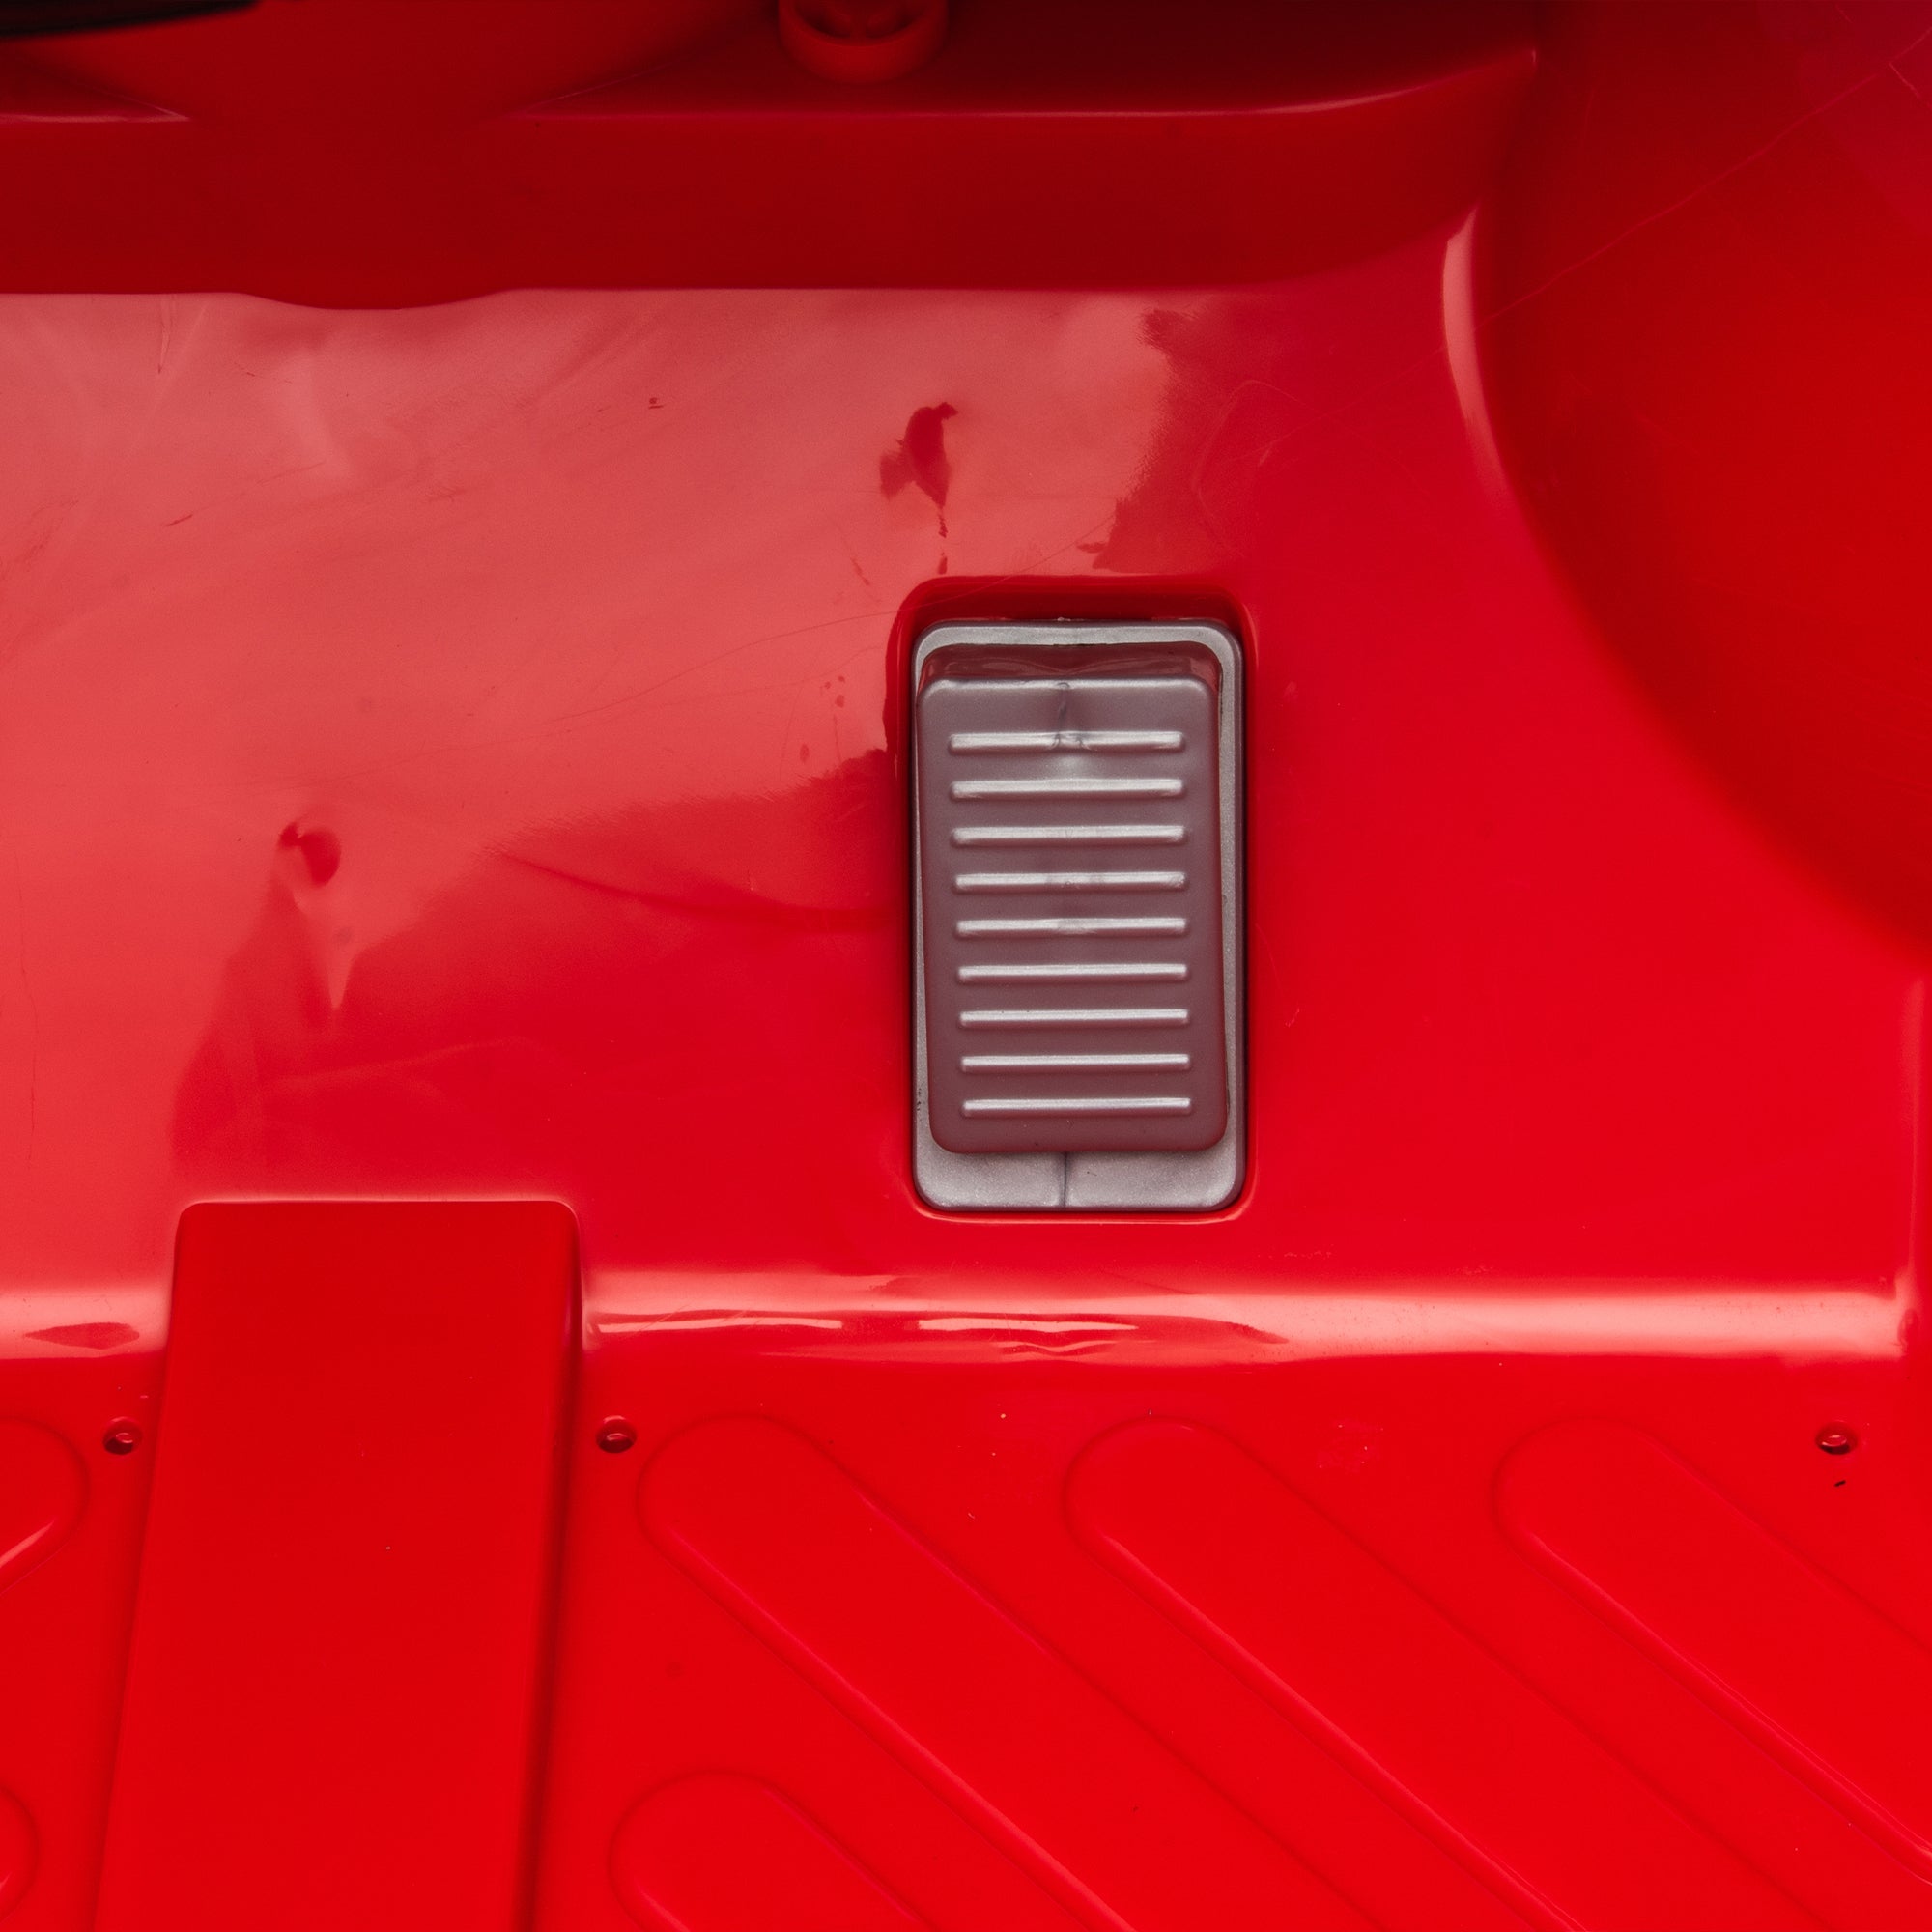 Officially Licensed Toyota Tundra Pickup,electric red-plastic